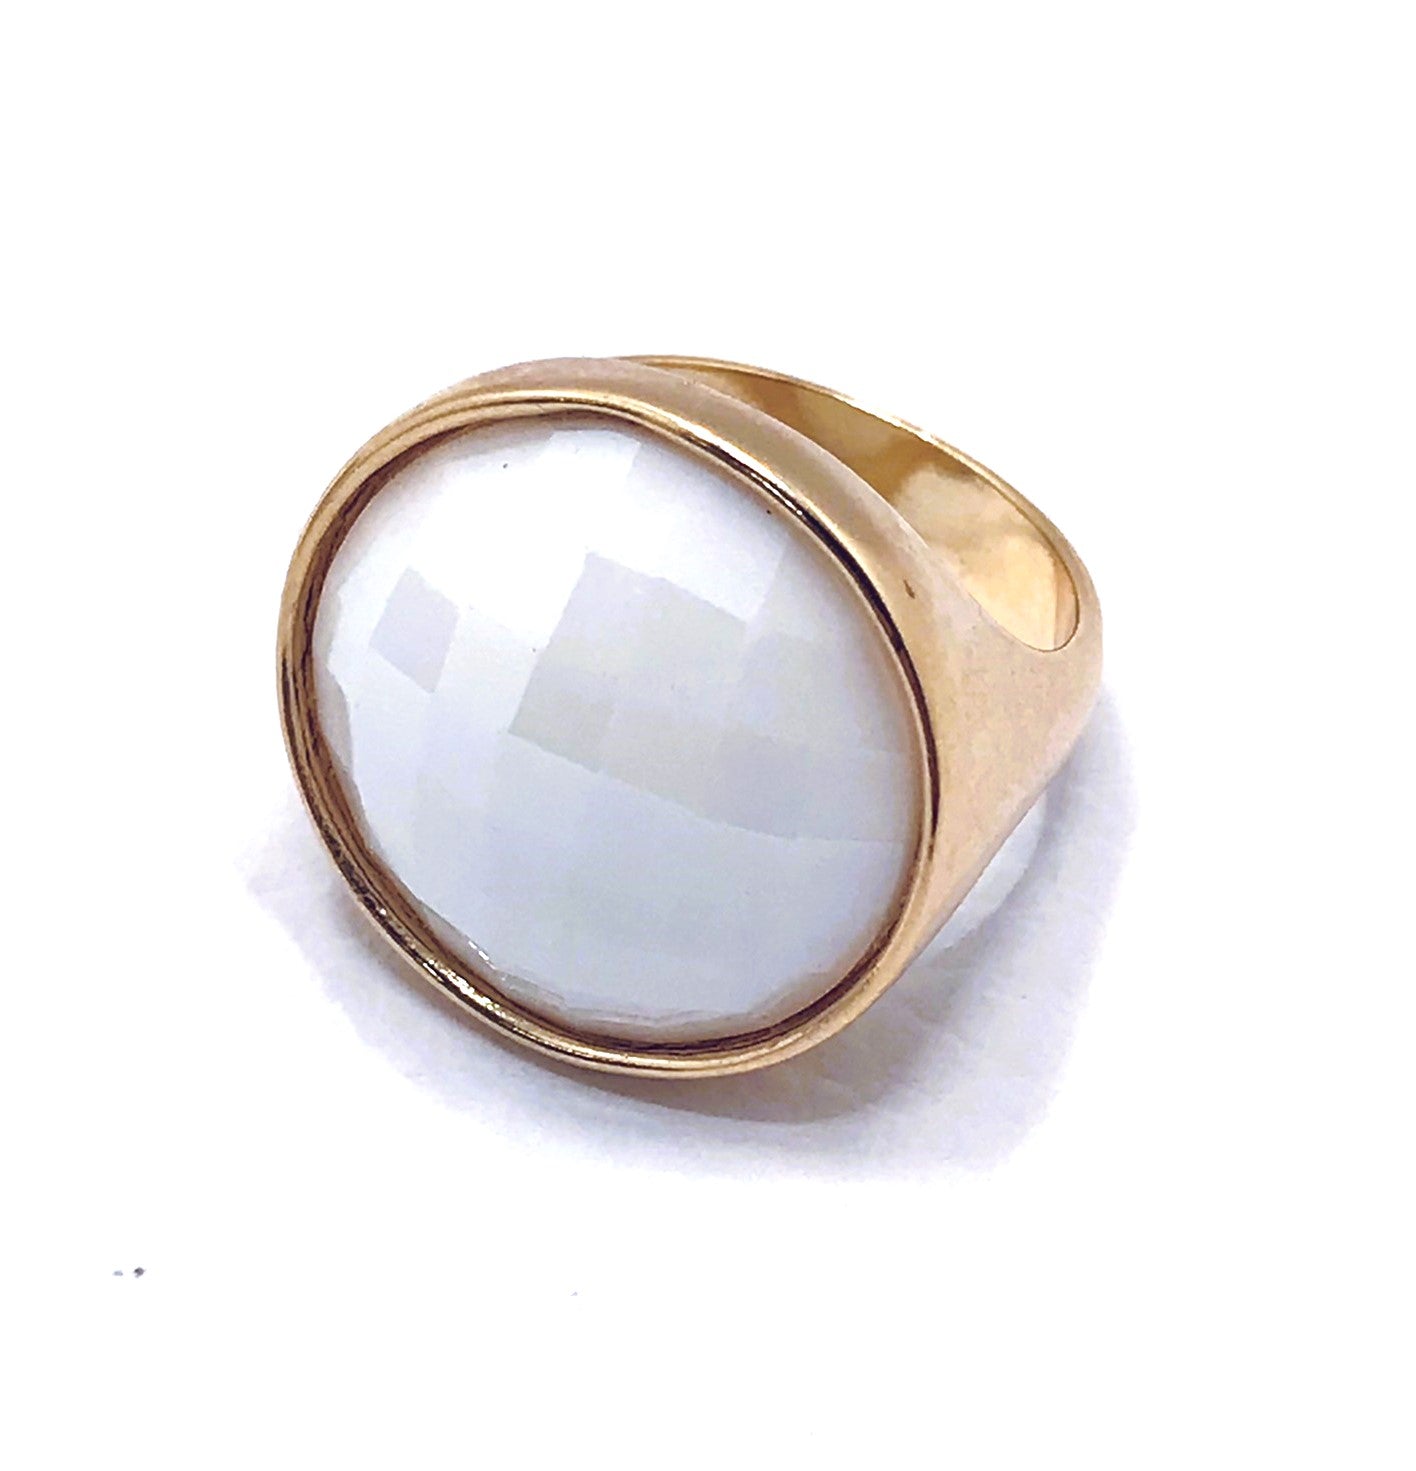 Large Pearly Gemstone Ring - Pearly Porcelain